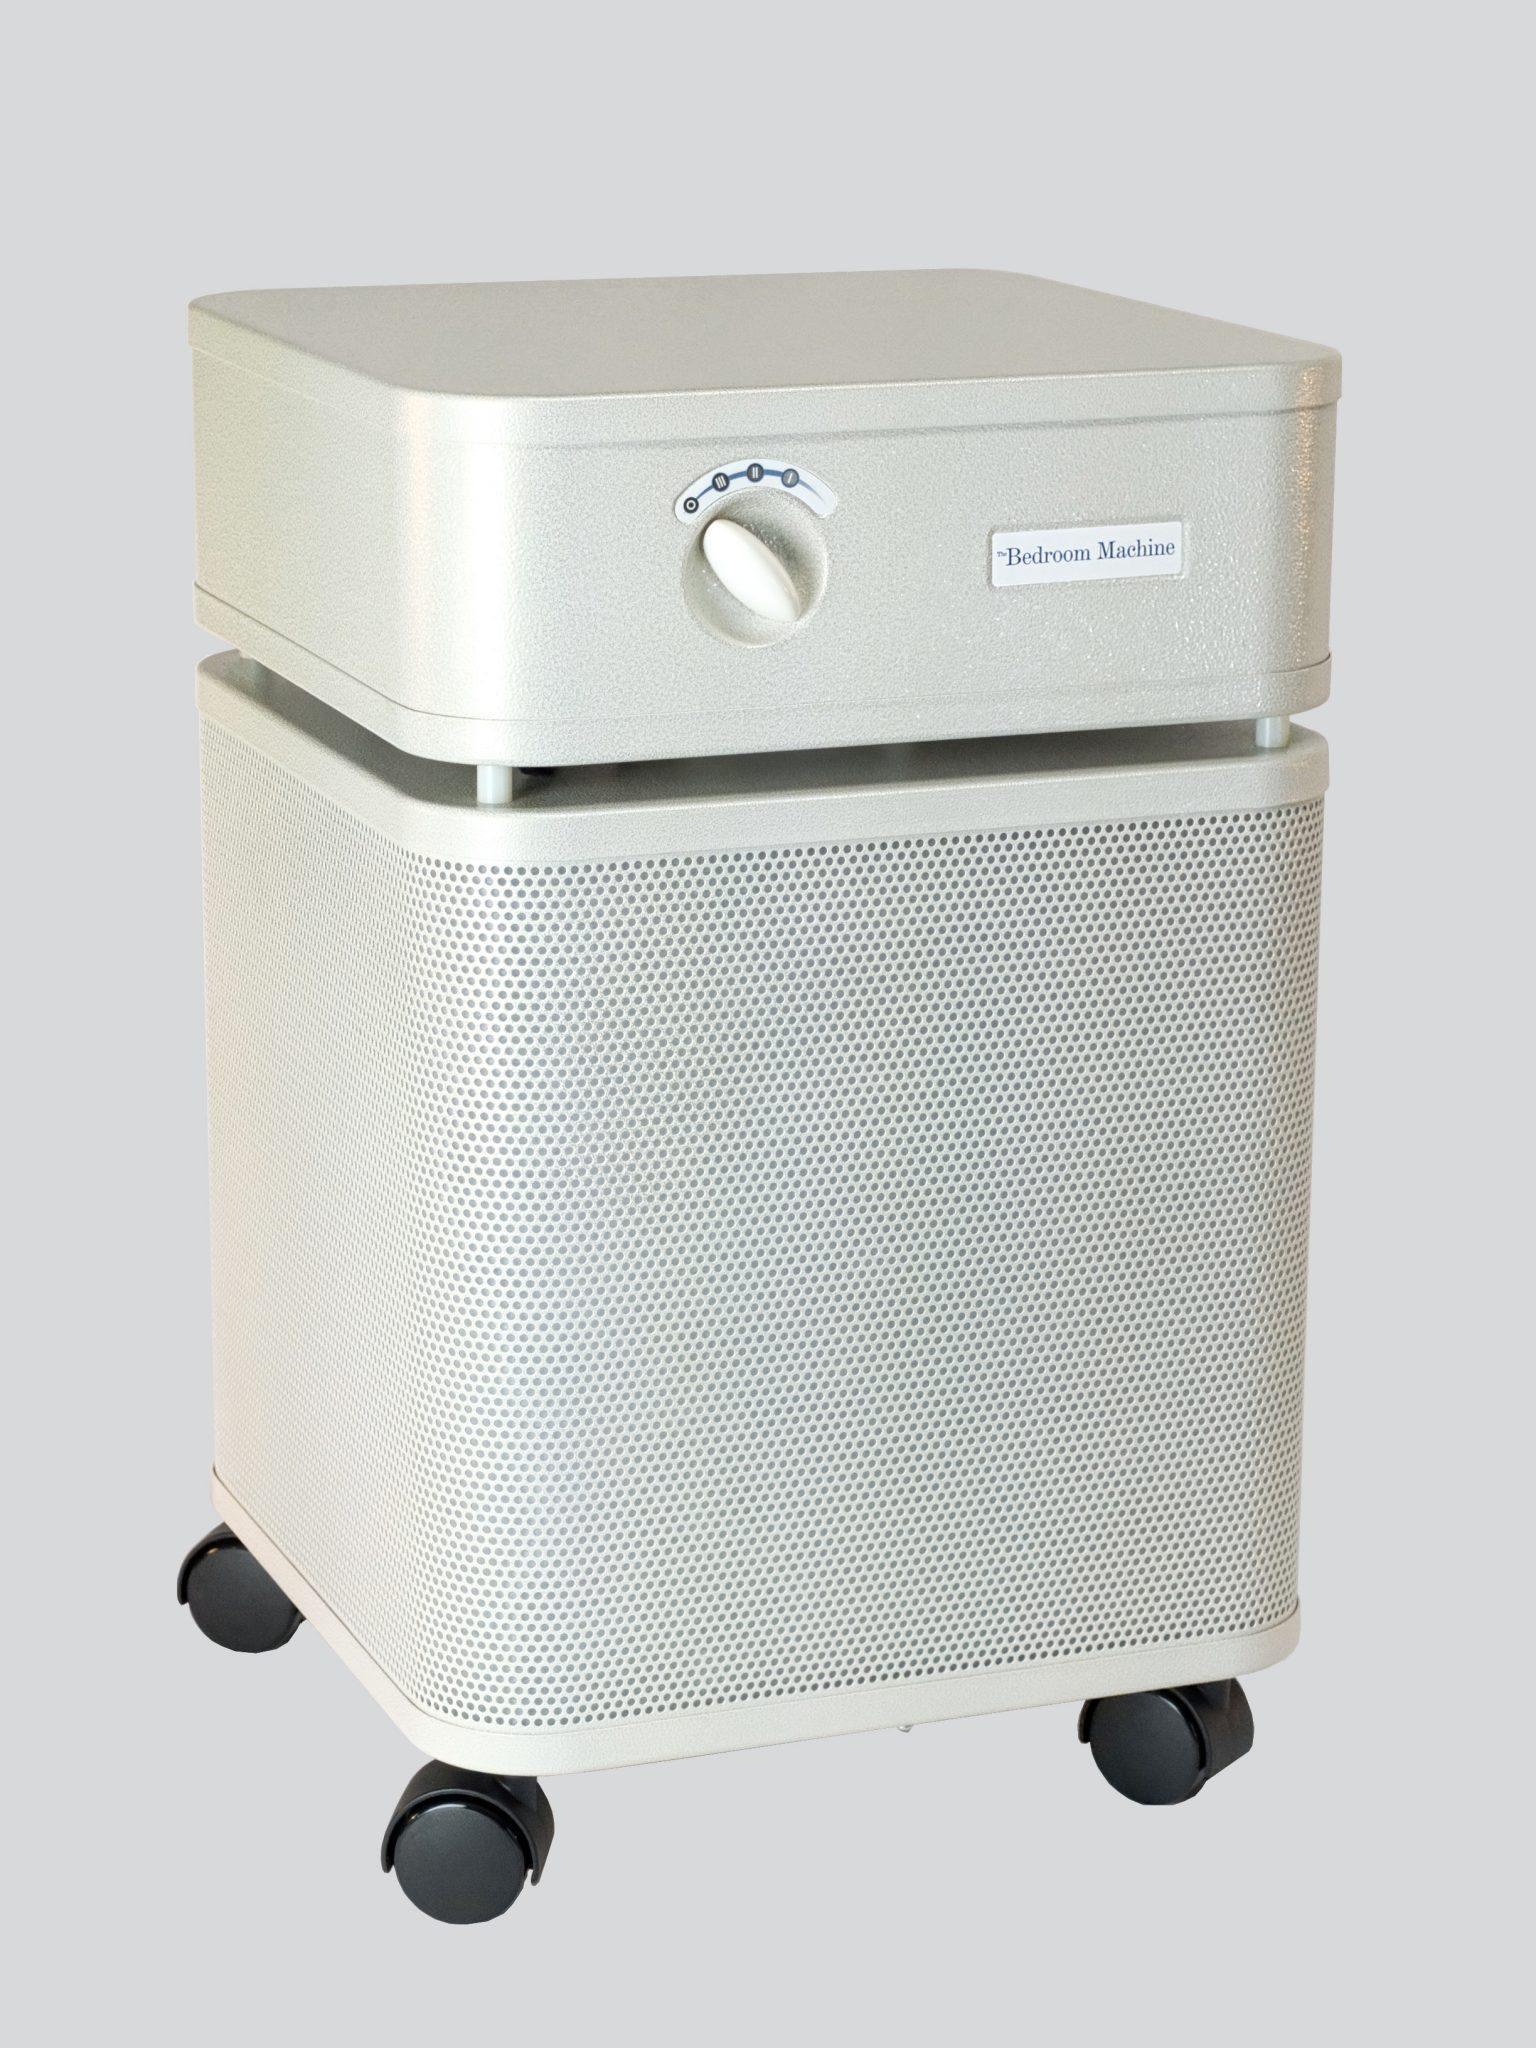 Austin Air Bedroom Machine® Air Purifier SKU B402A1. Removes Dangerous Pollutants from Your Bedroom. - Elite Air Purifiers